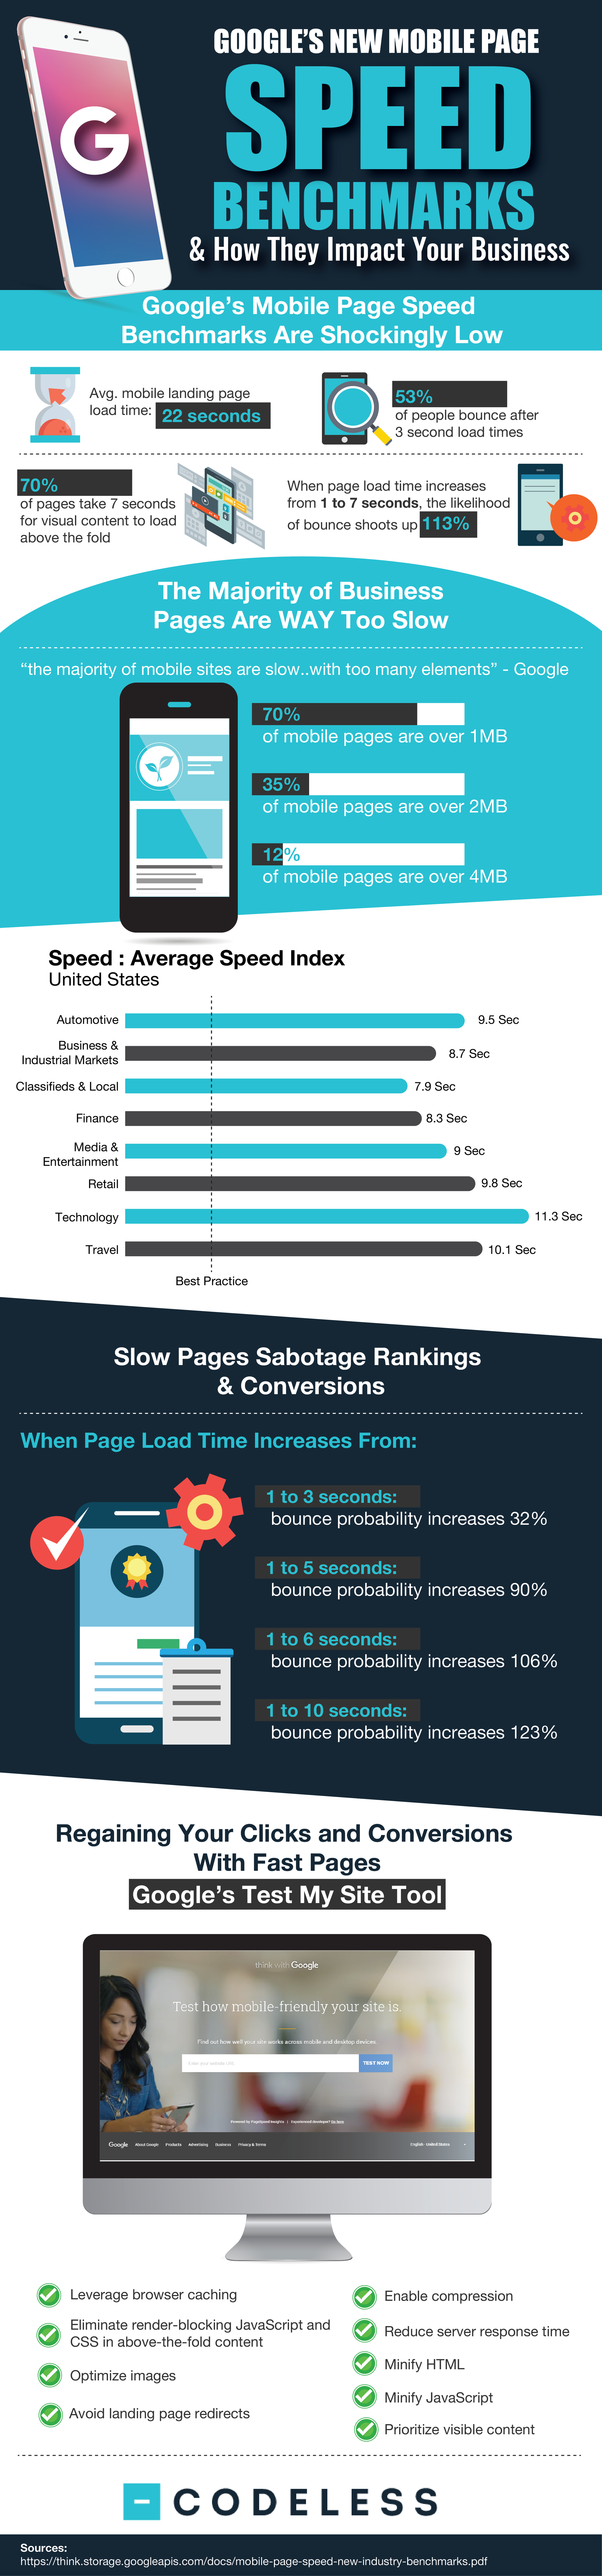 Infographic: Google's new mobile page speed benchmarks and how they impact your business